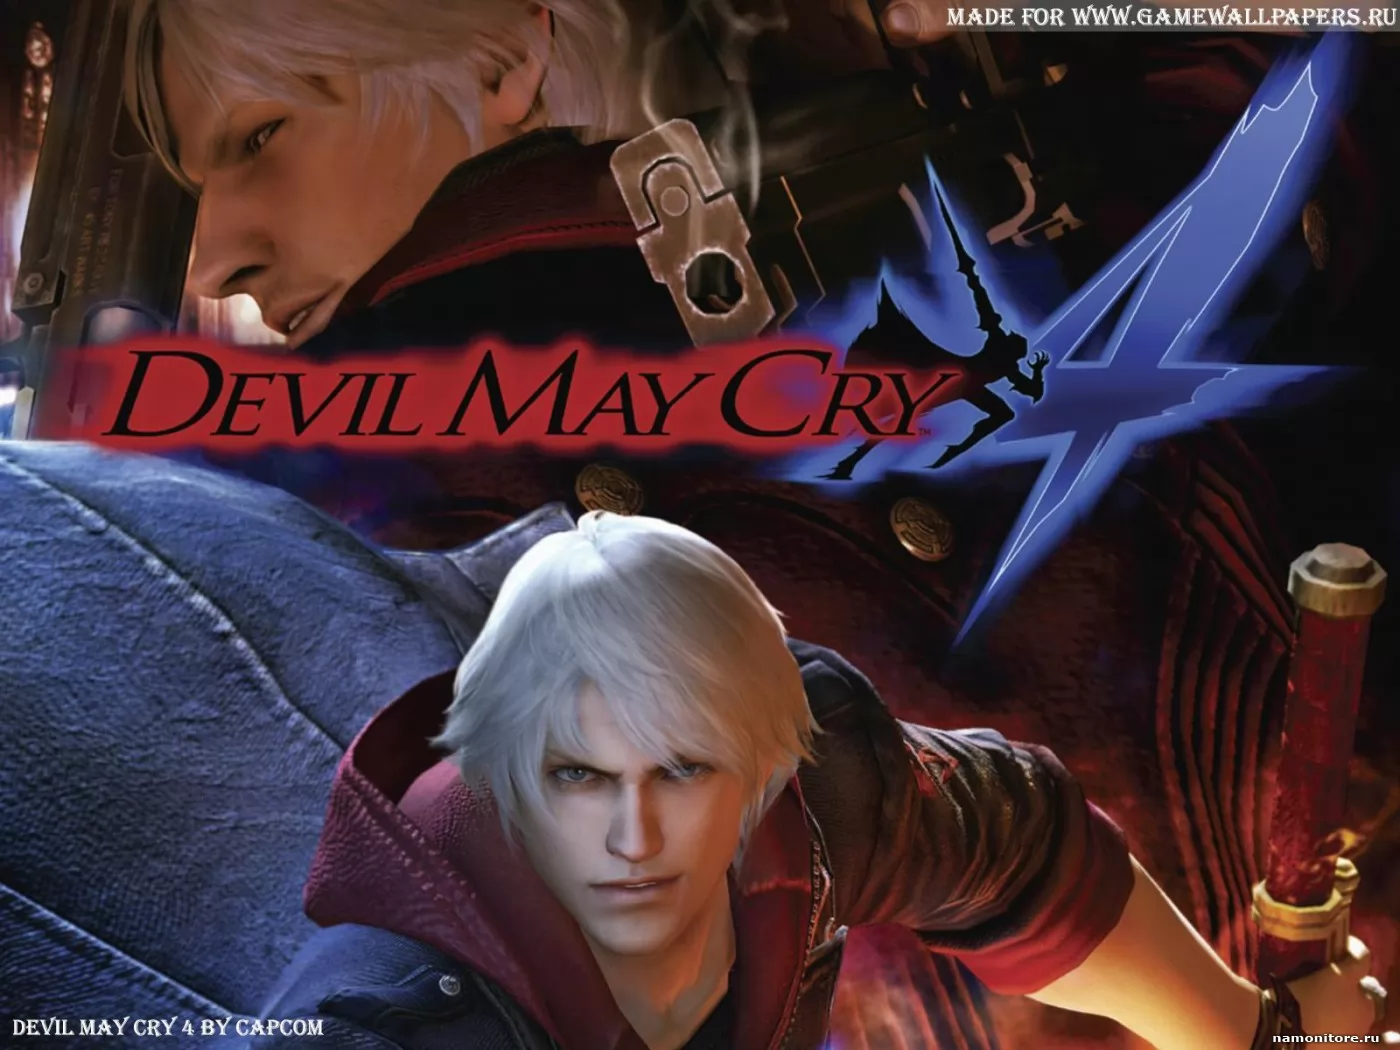 Devil May Cry 4, ,   